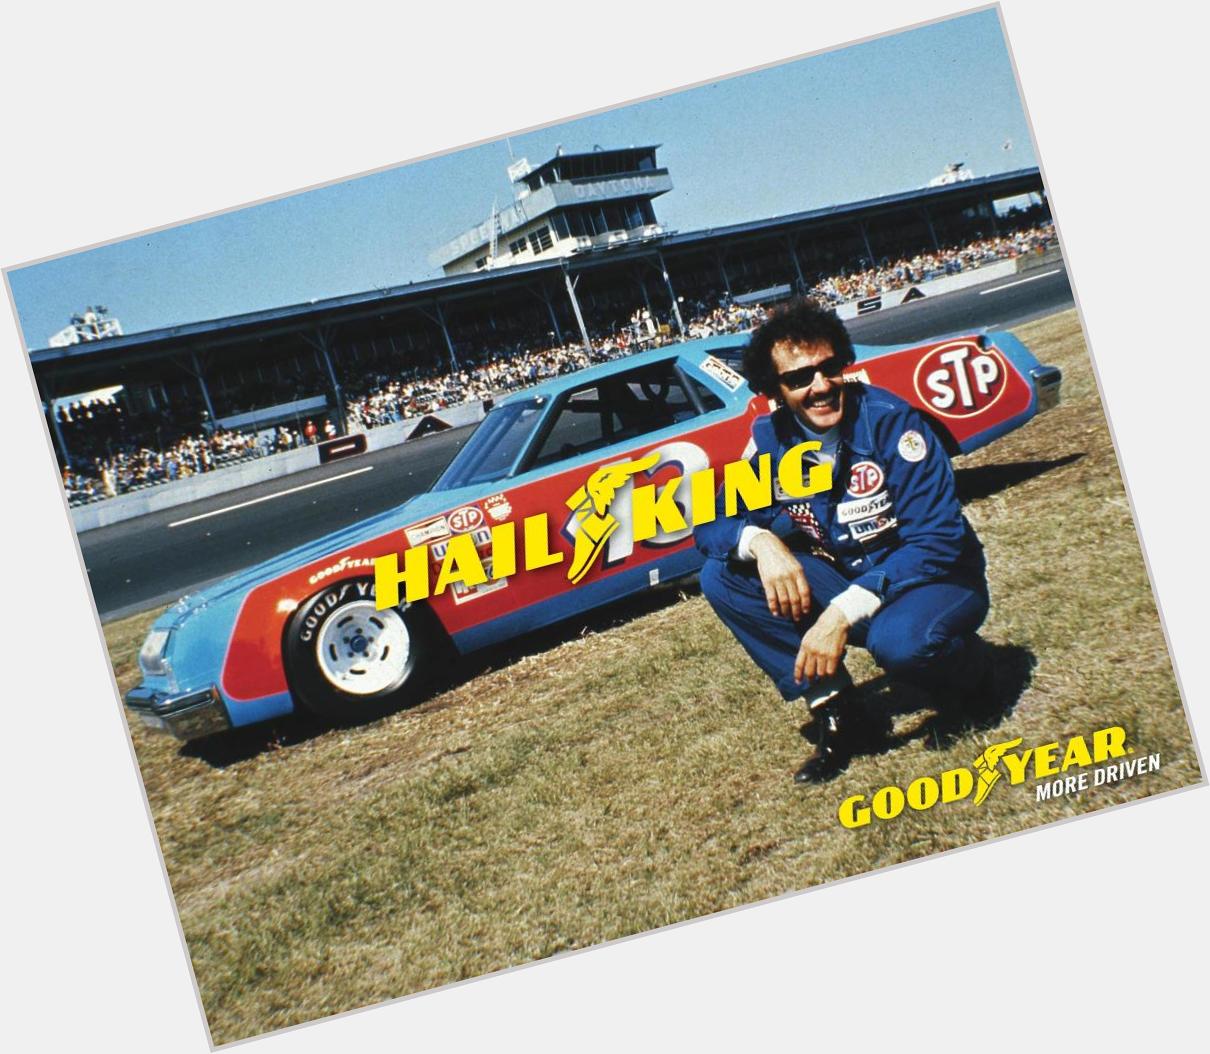 Remessage to help us wish a happy birthday to Richard Petty!   